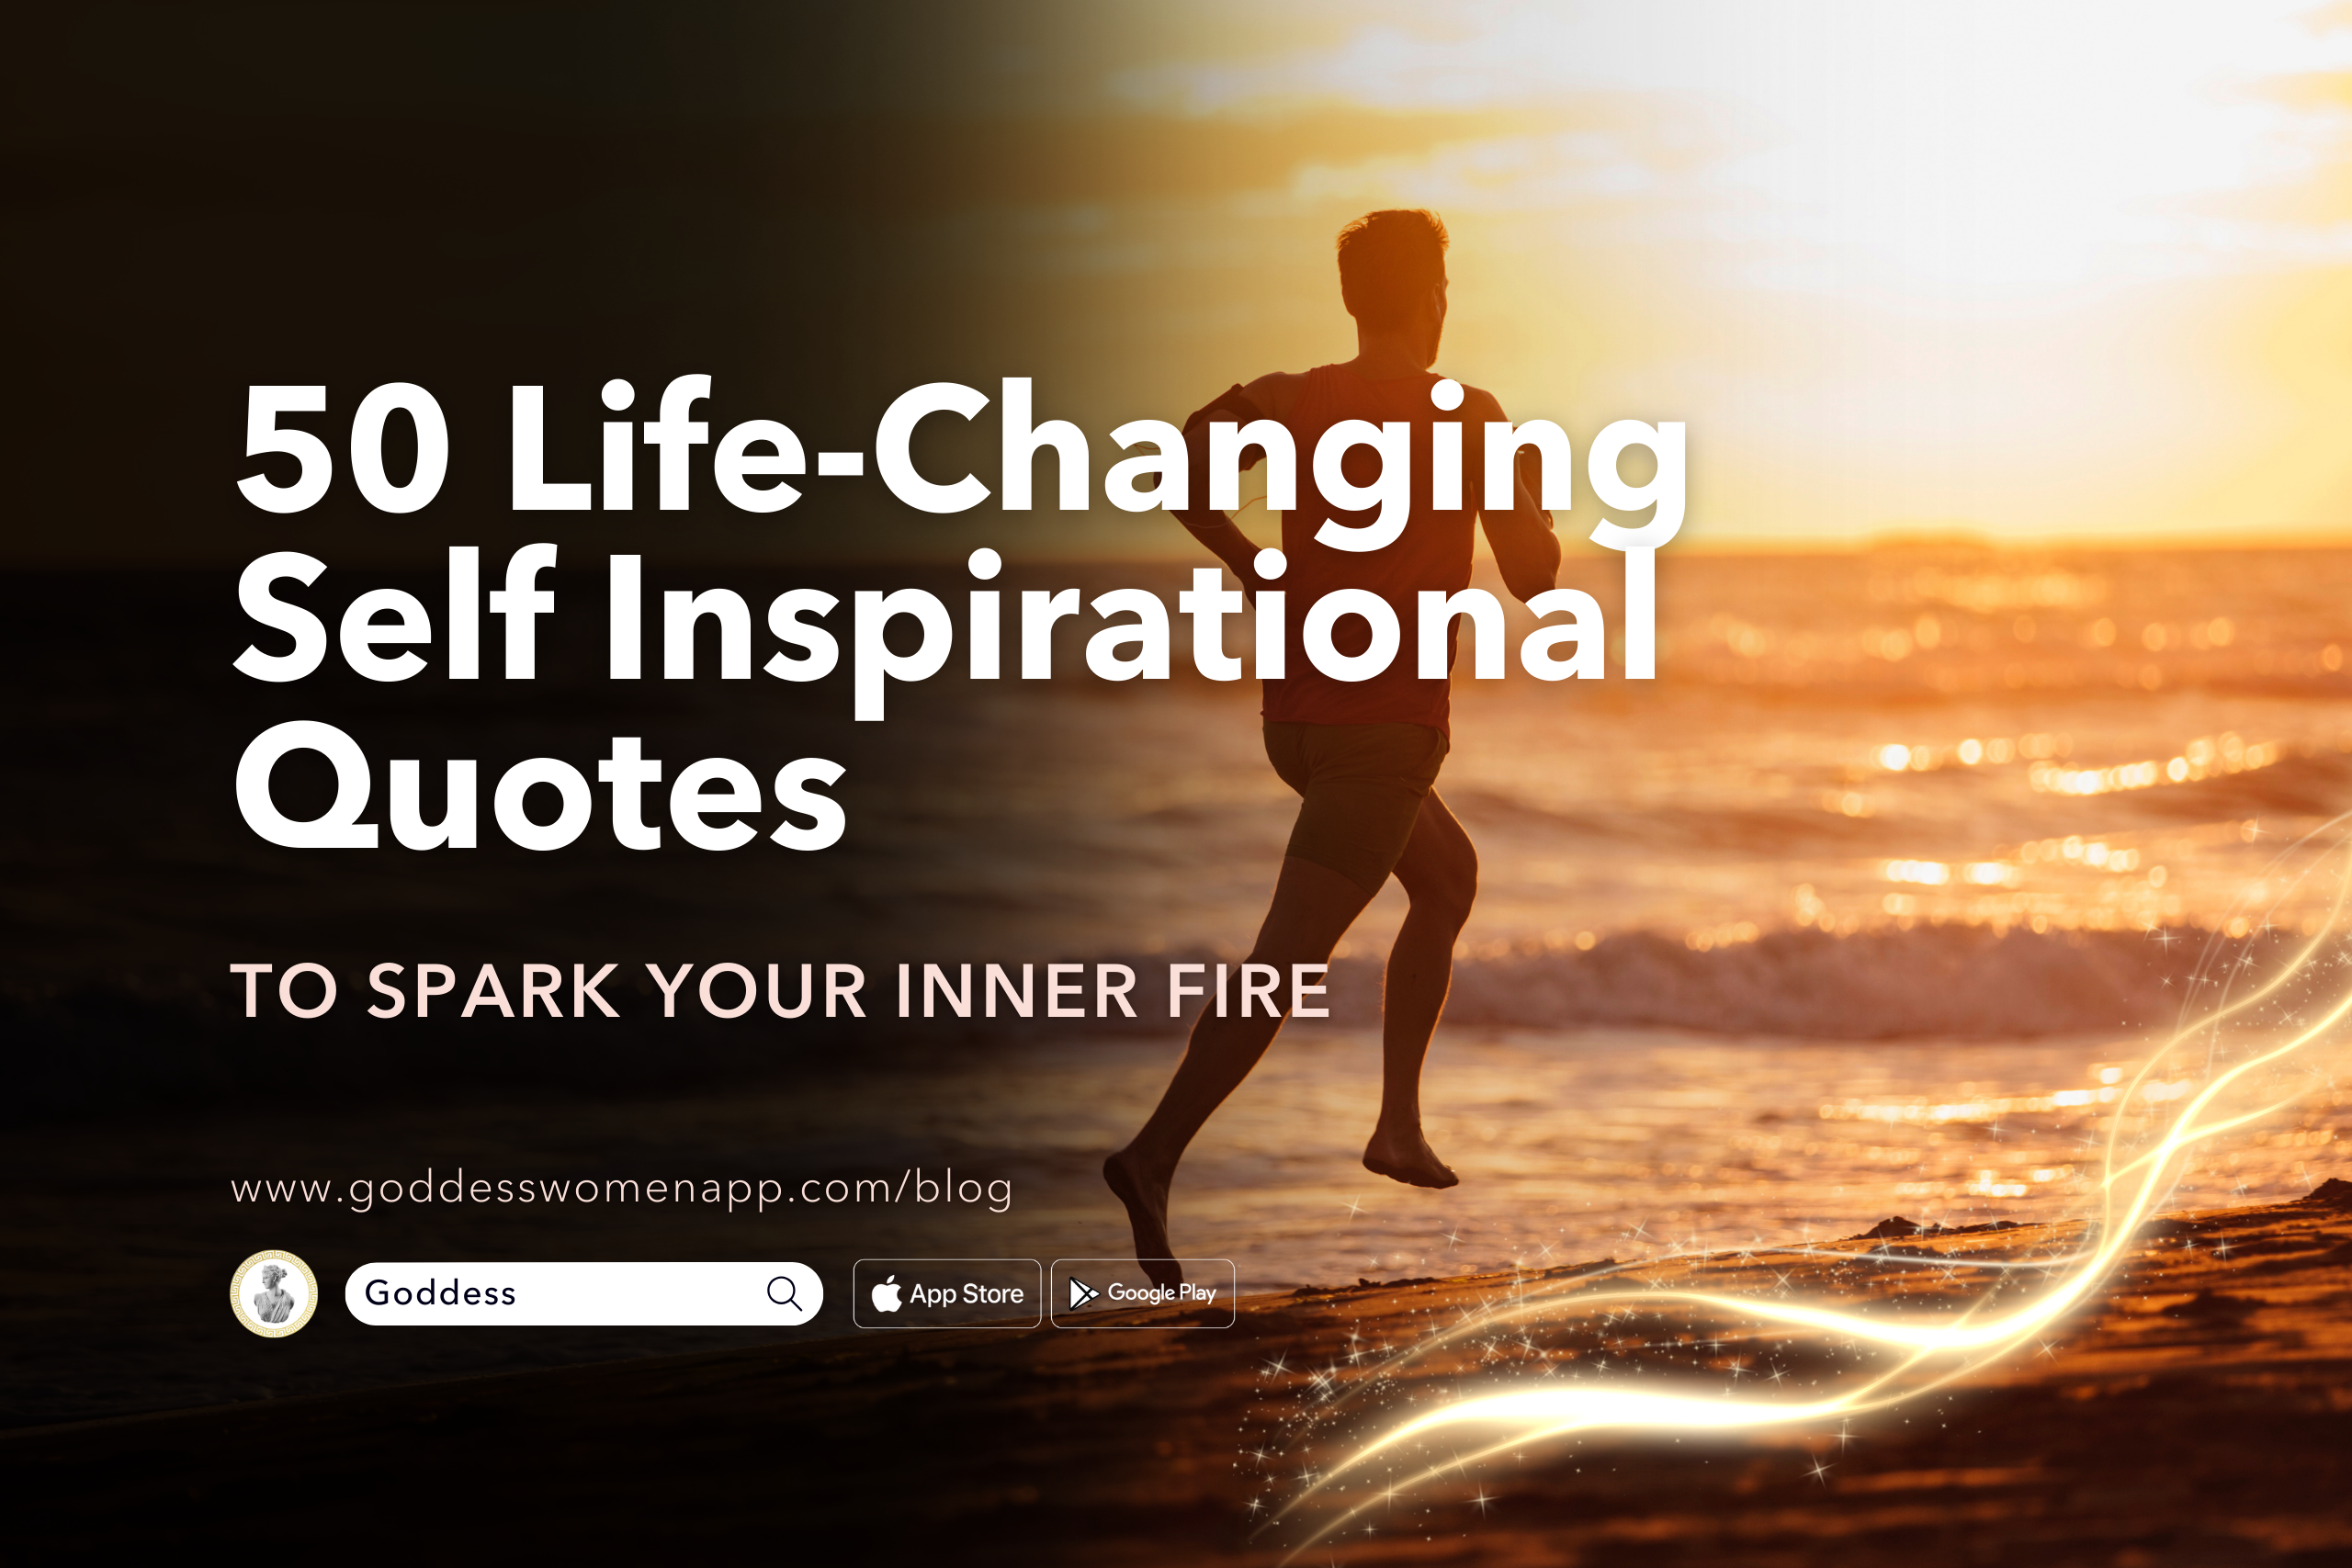 50 Life-Changing Self Inspirational Quotes to Spark Your Inner Fire